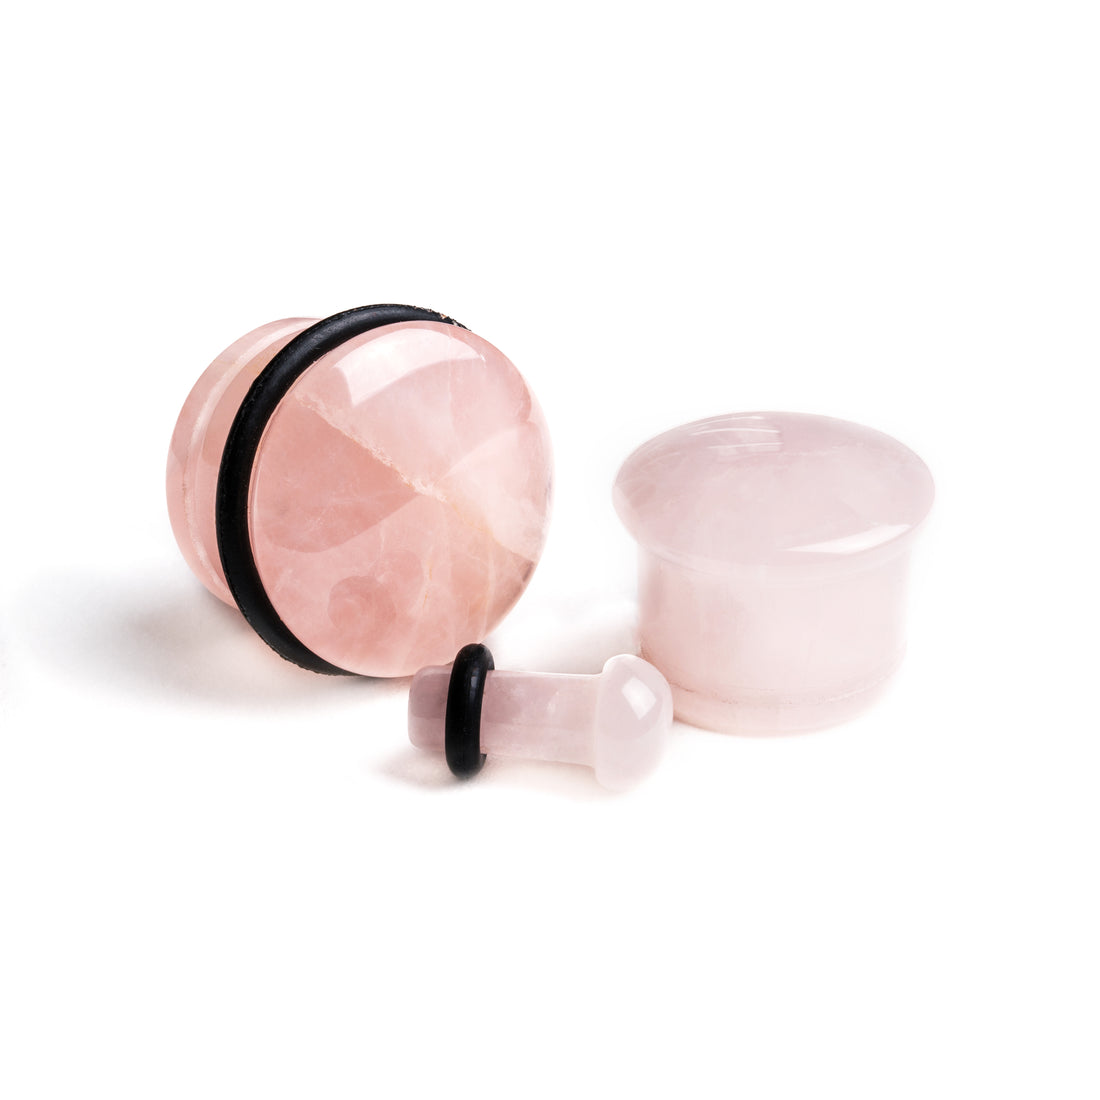 several sizes of single flare rose quartz stone ear plugs front and side view